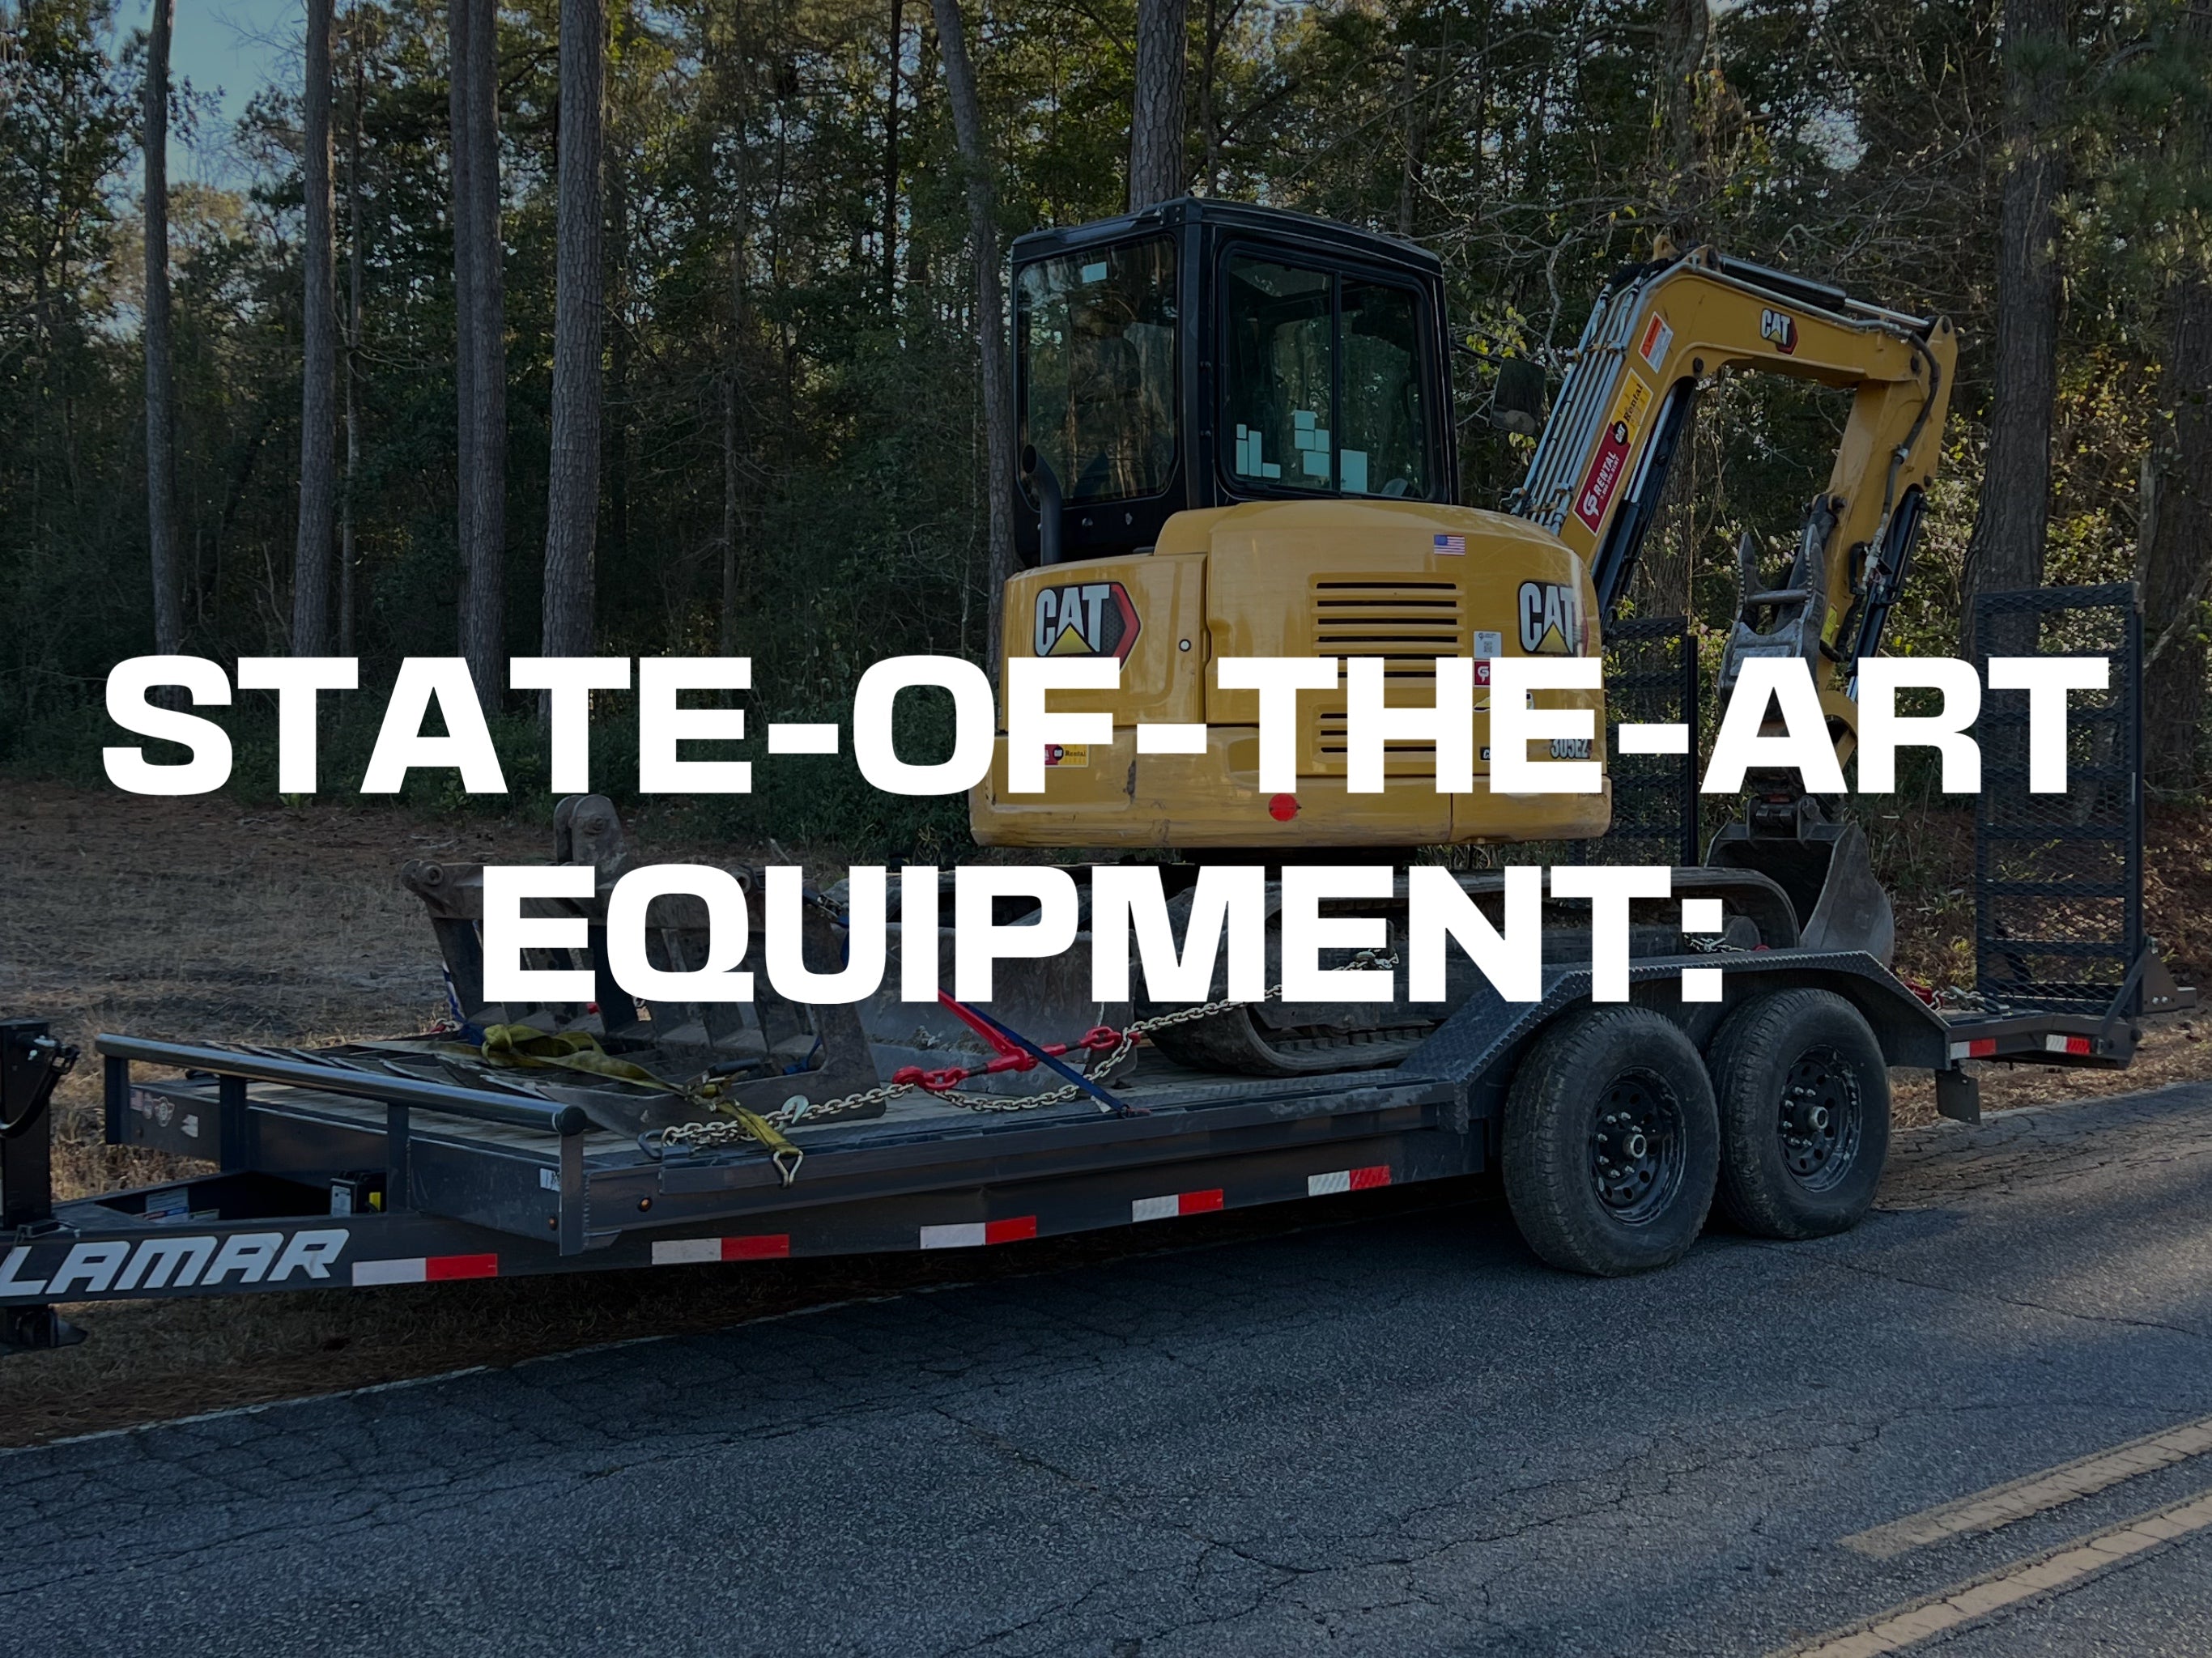 CAROLINA EARTHWERX UTILIZES STATE OF THE ART EQUIPMENT TO ACCOMPLISH EXCAVATION, GRADING, DRAINAGE, AND LAND CLEARING PROJECTS.